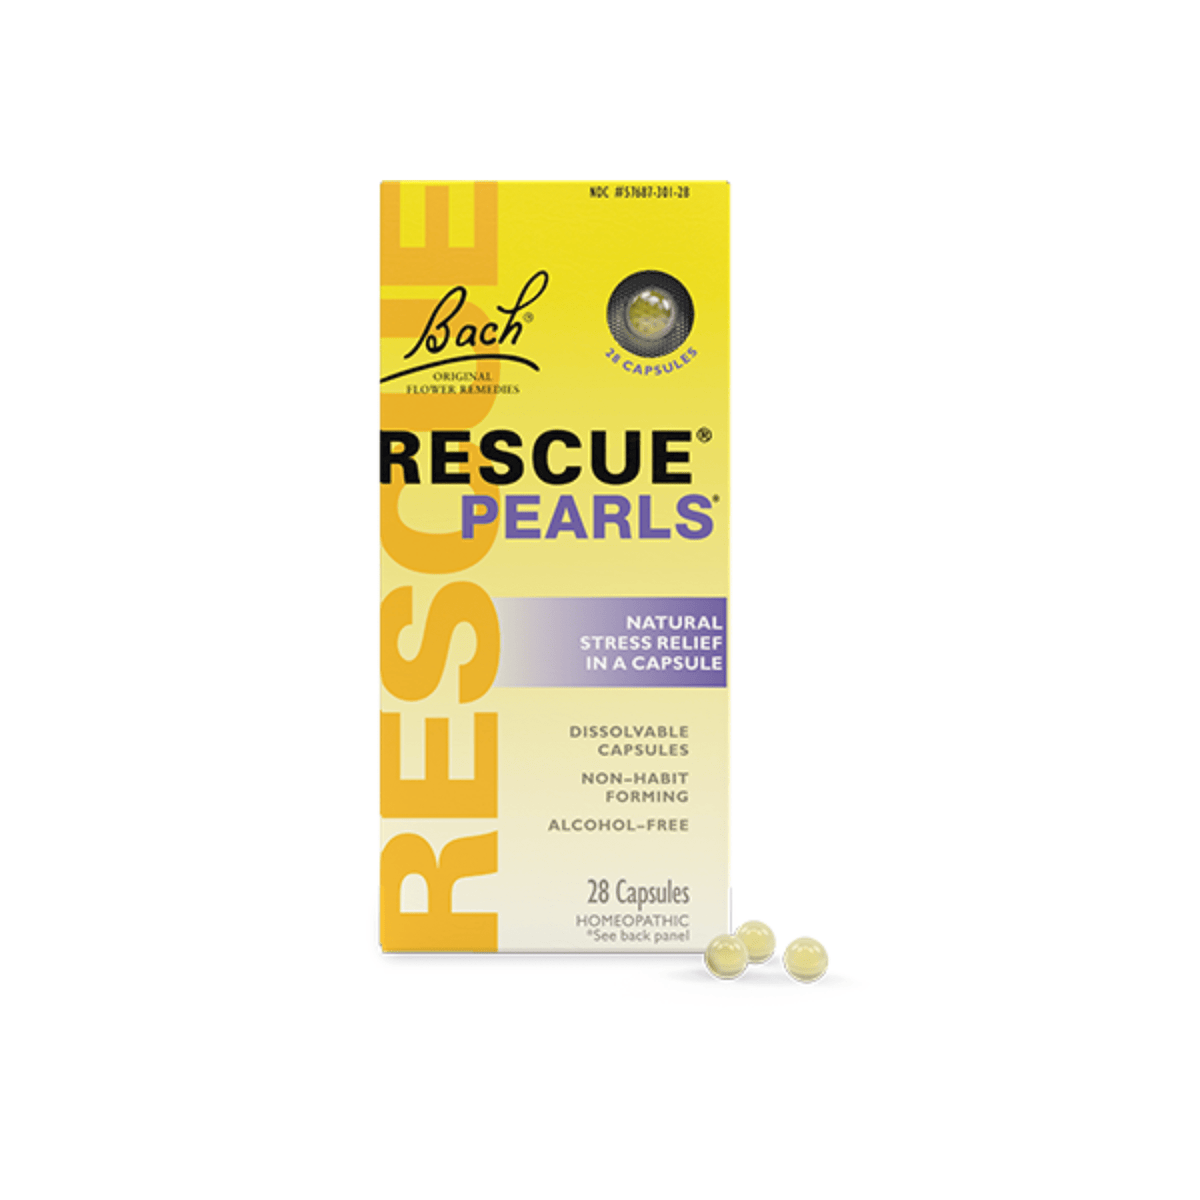 Primary Image of Rescue Pearls